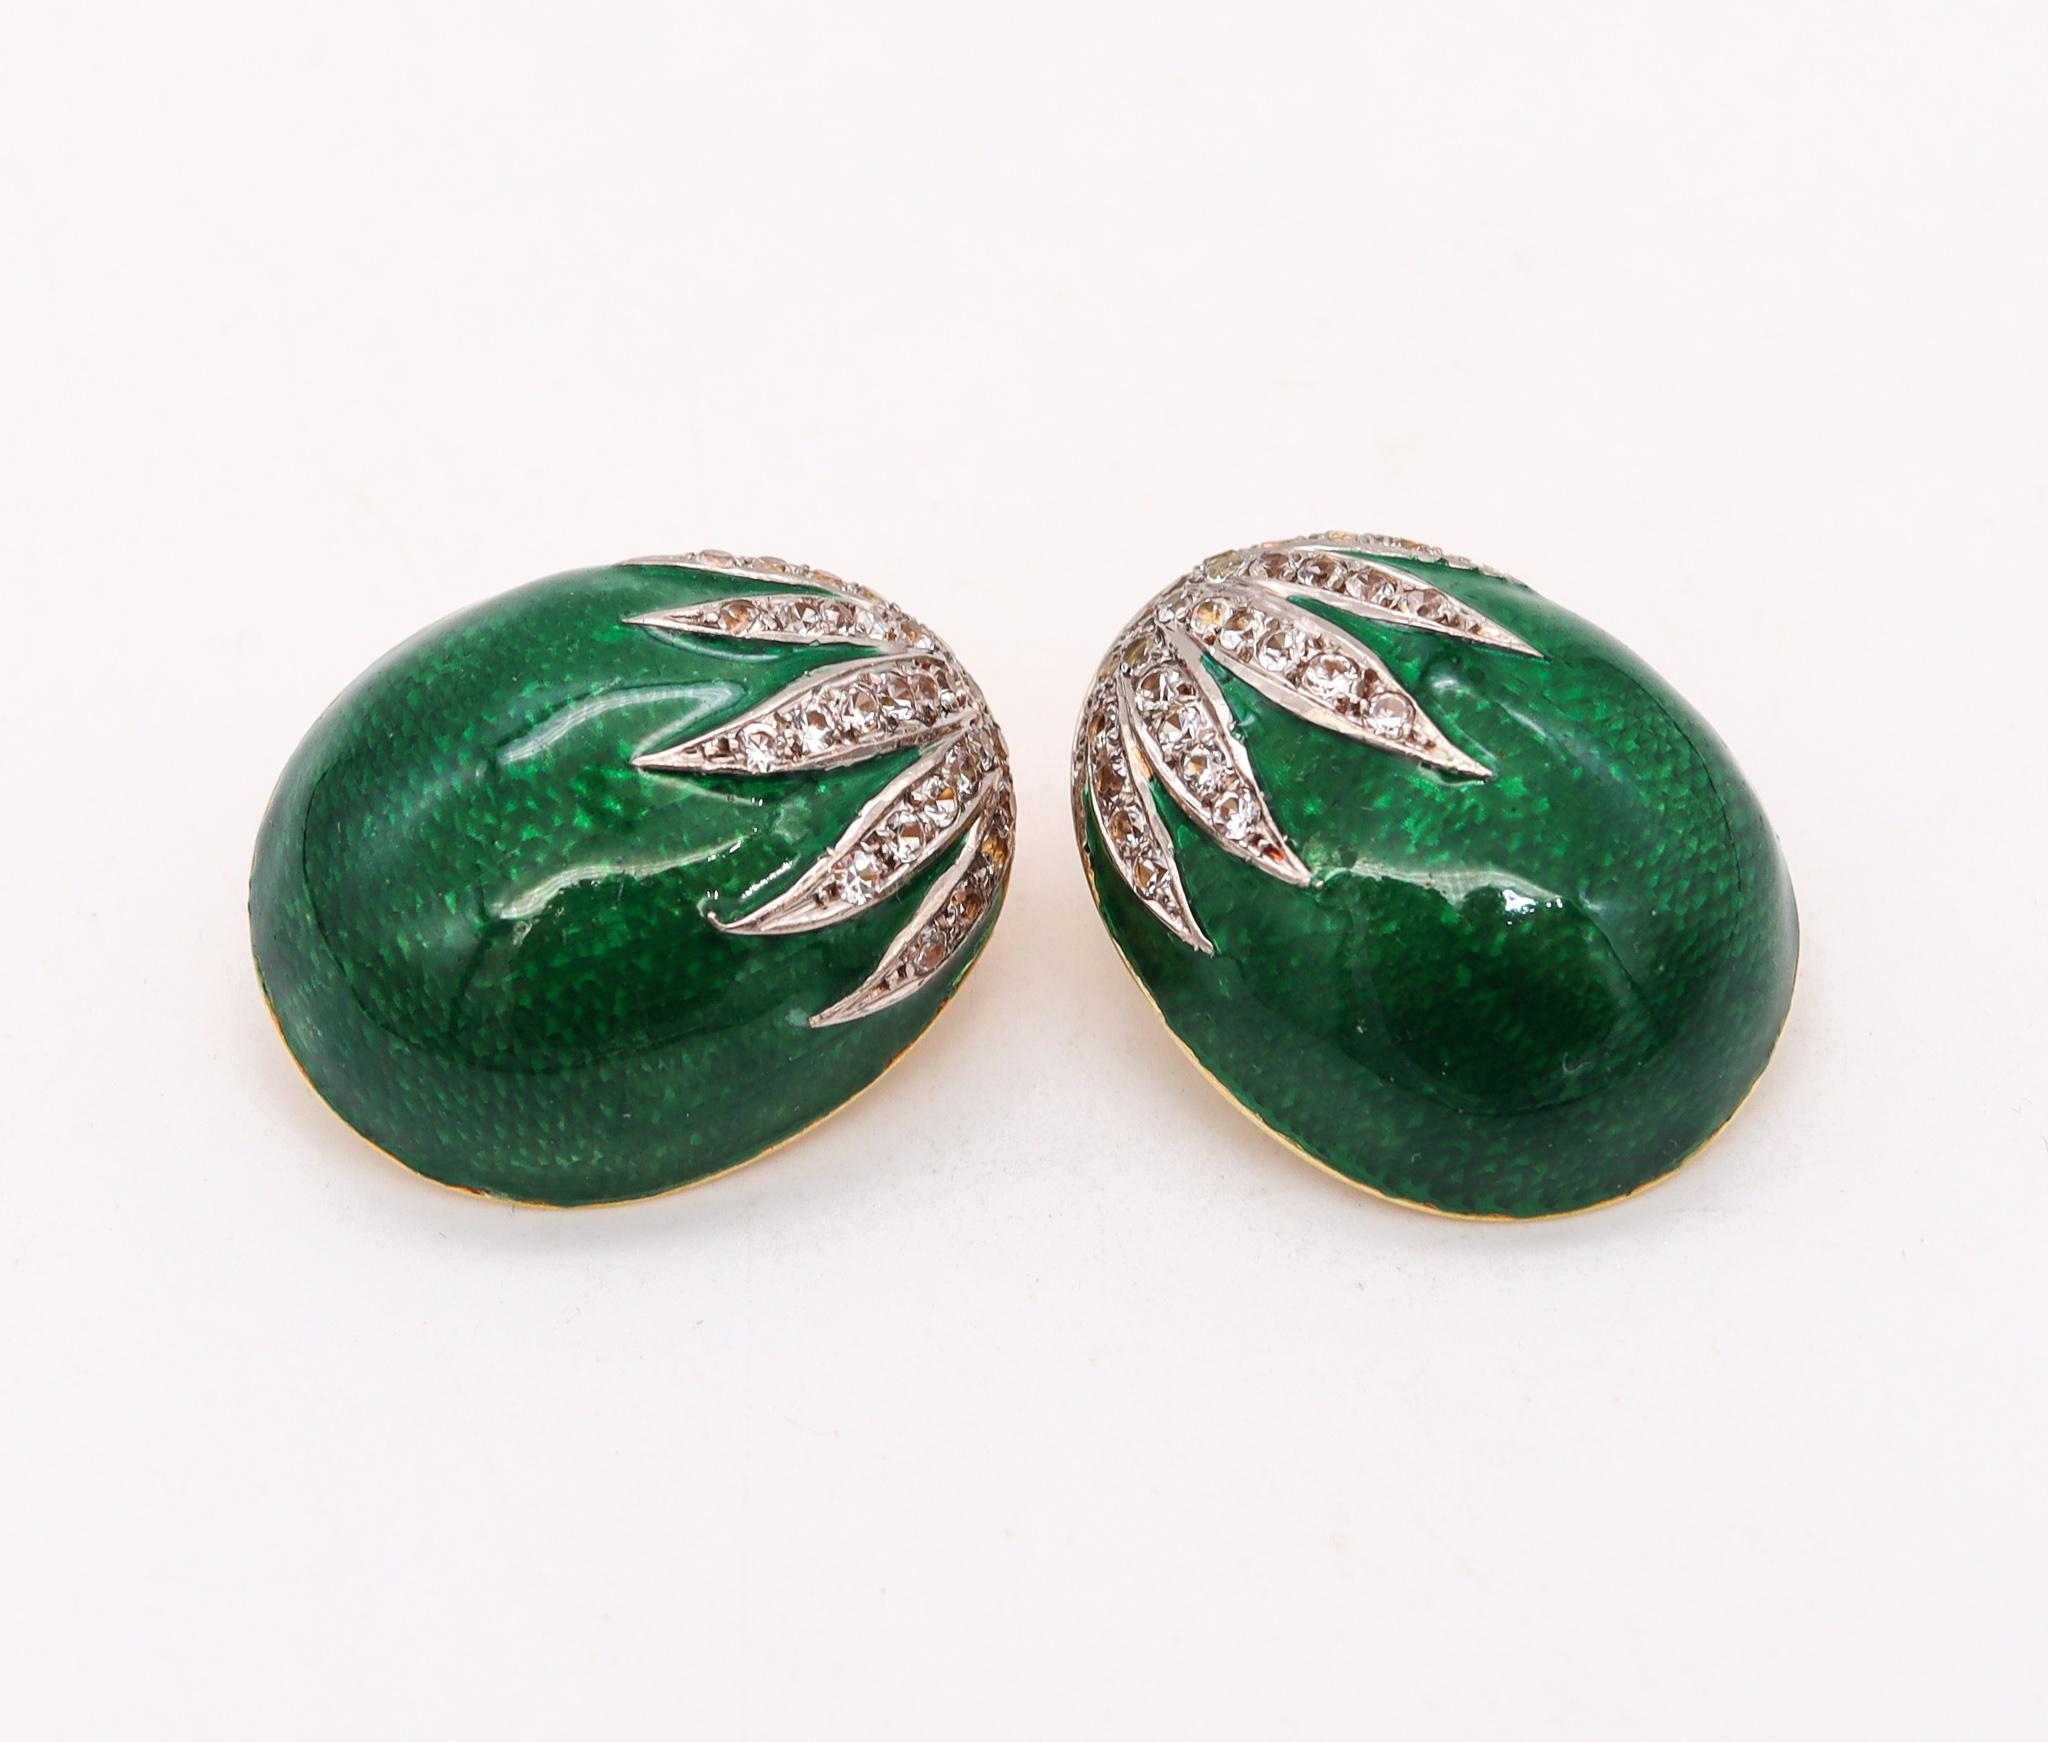 Enameled clip earrings with diamonds.

Colorful pieces, created in Italy during the late mid-century period, circa 1960's. These clip-on earrings has been crafted in solid yellow gold of 18 karats and embellished with applications of hot green